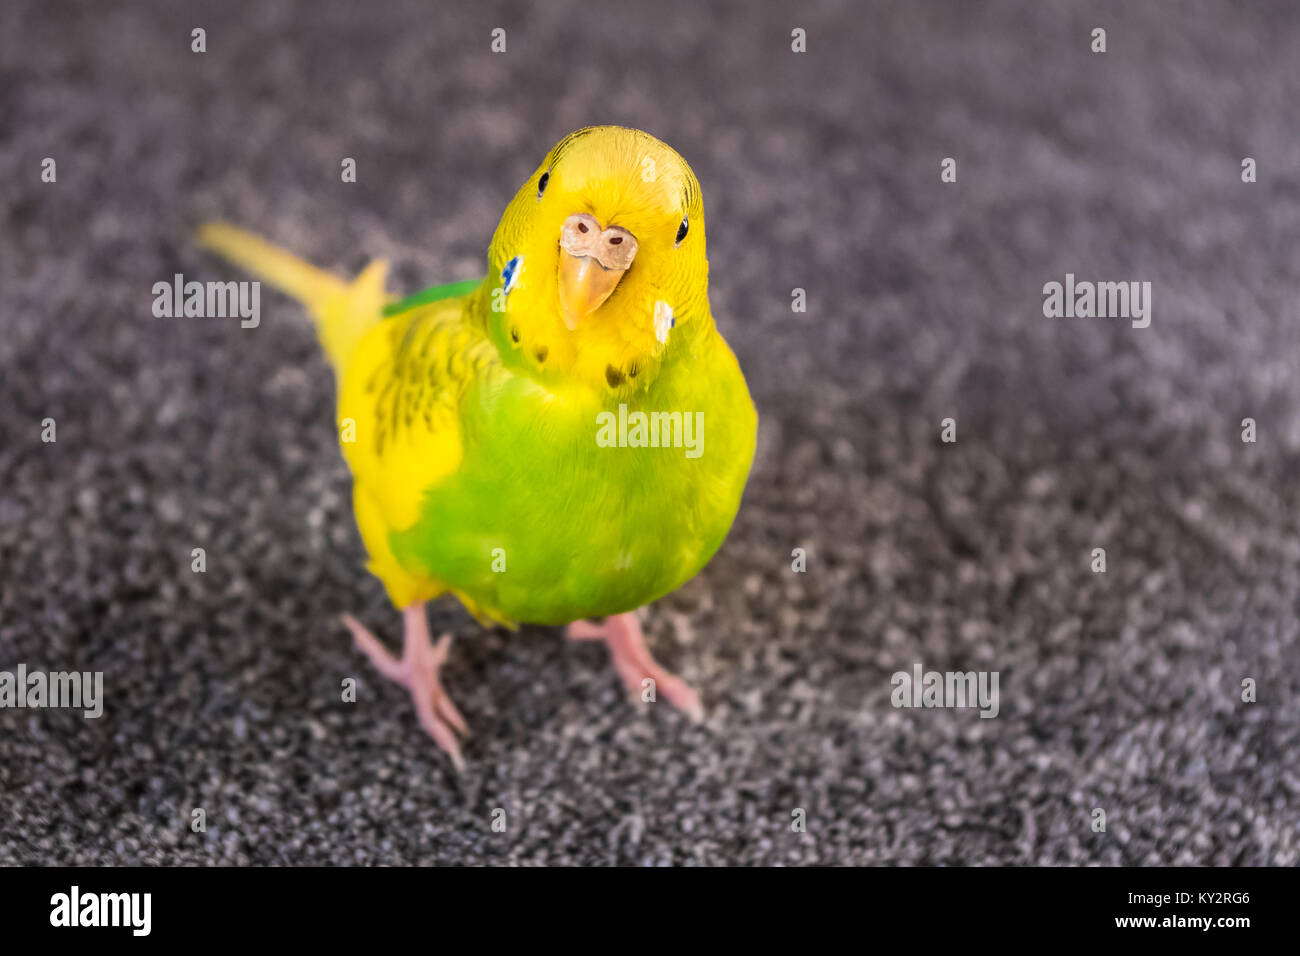 yellow and green parakeet budgerigar on a carpet looking up at the camera with a cute expression Stock Photo